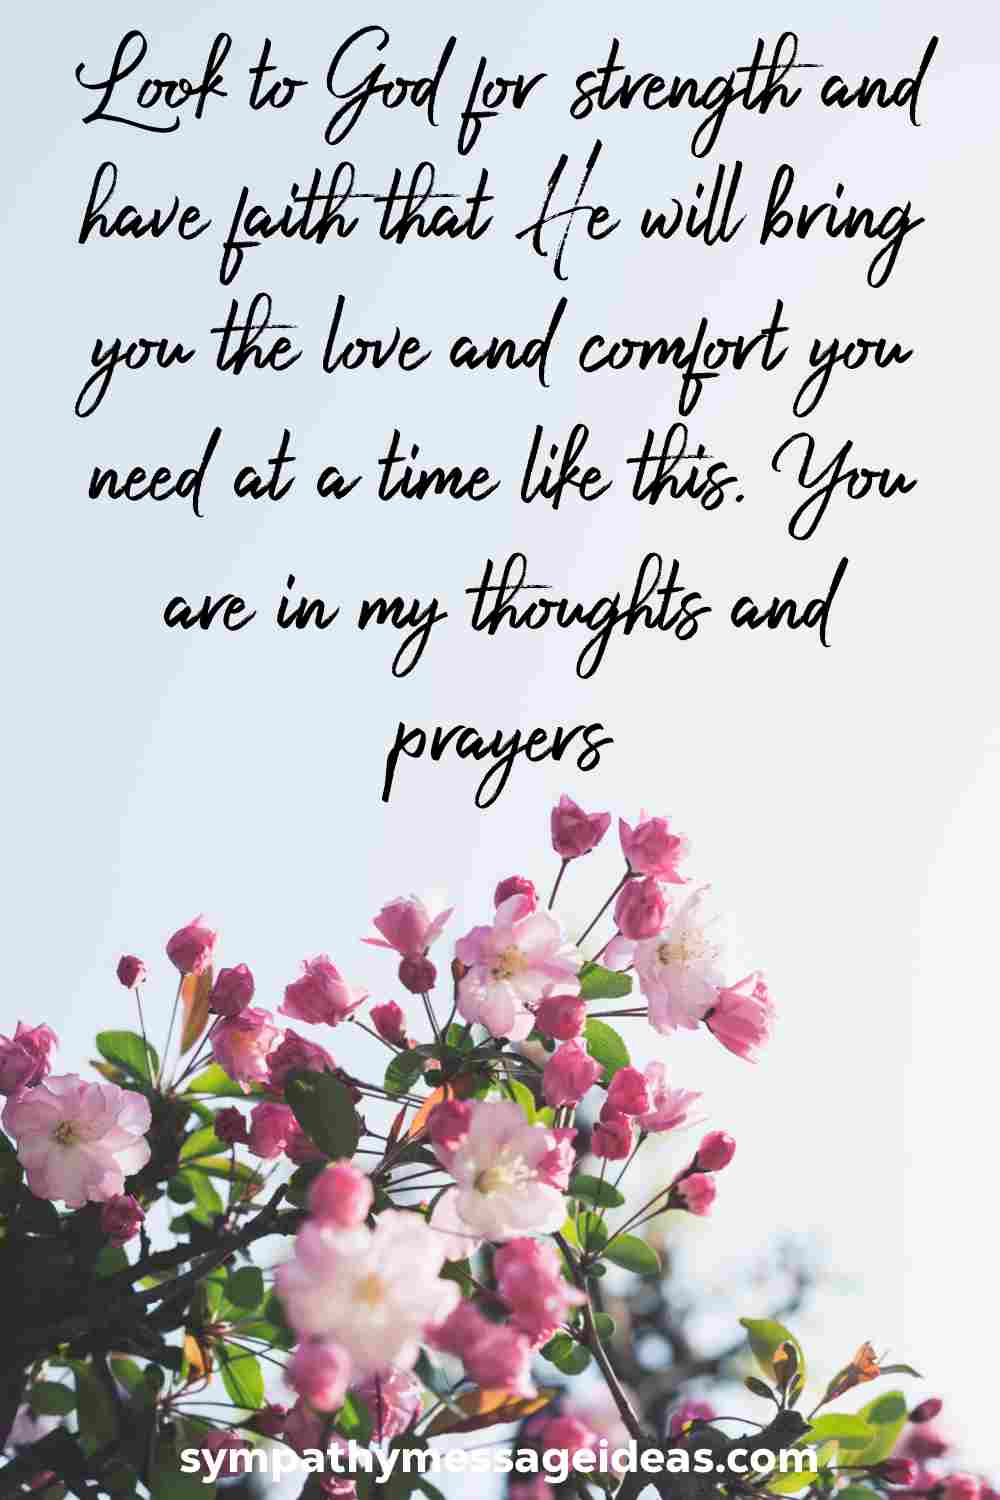 christian-condolence-messages-and-quotes-sympathy-card-messages